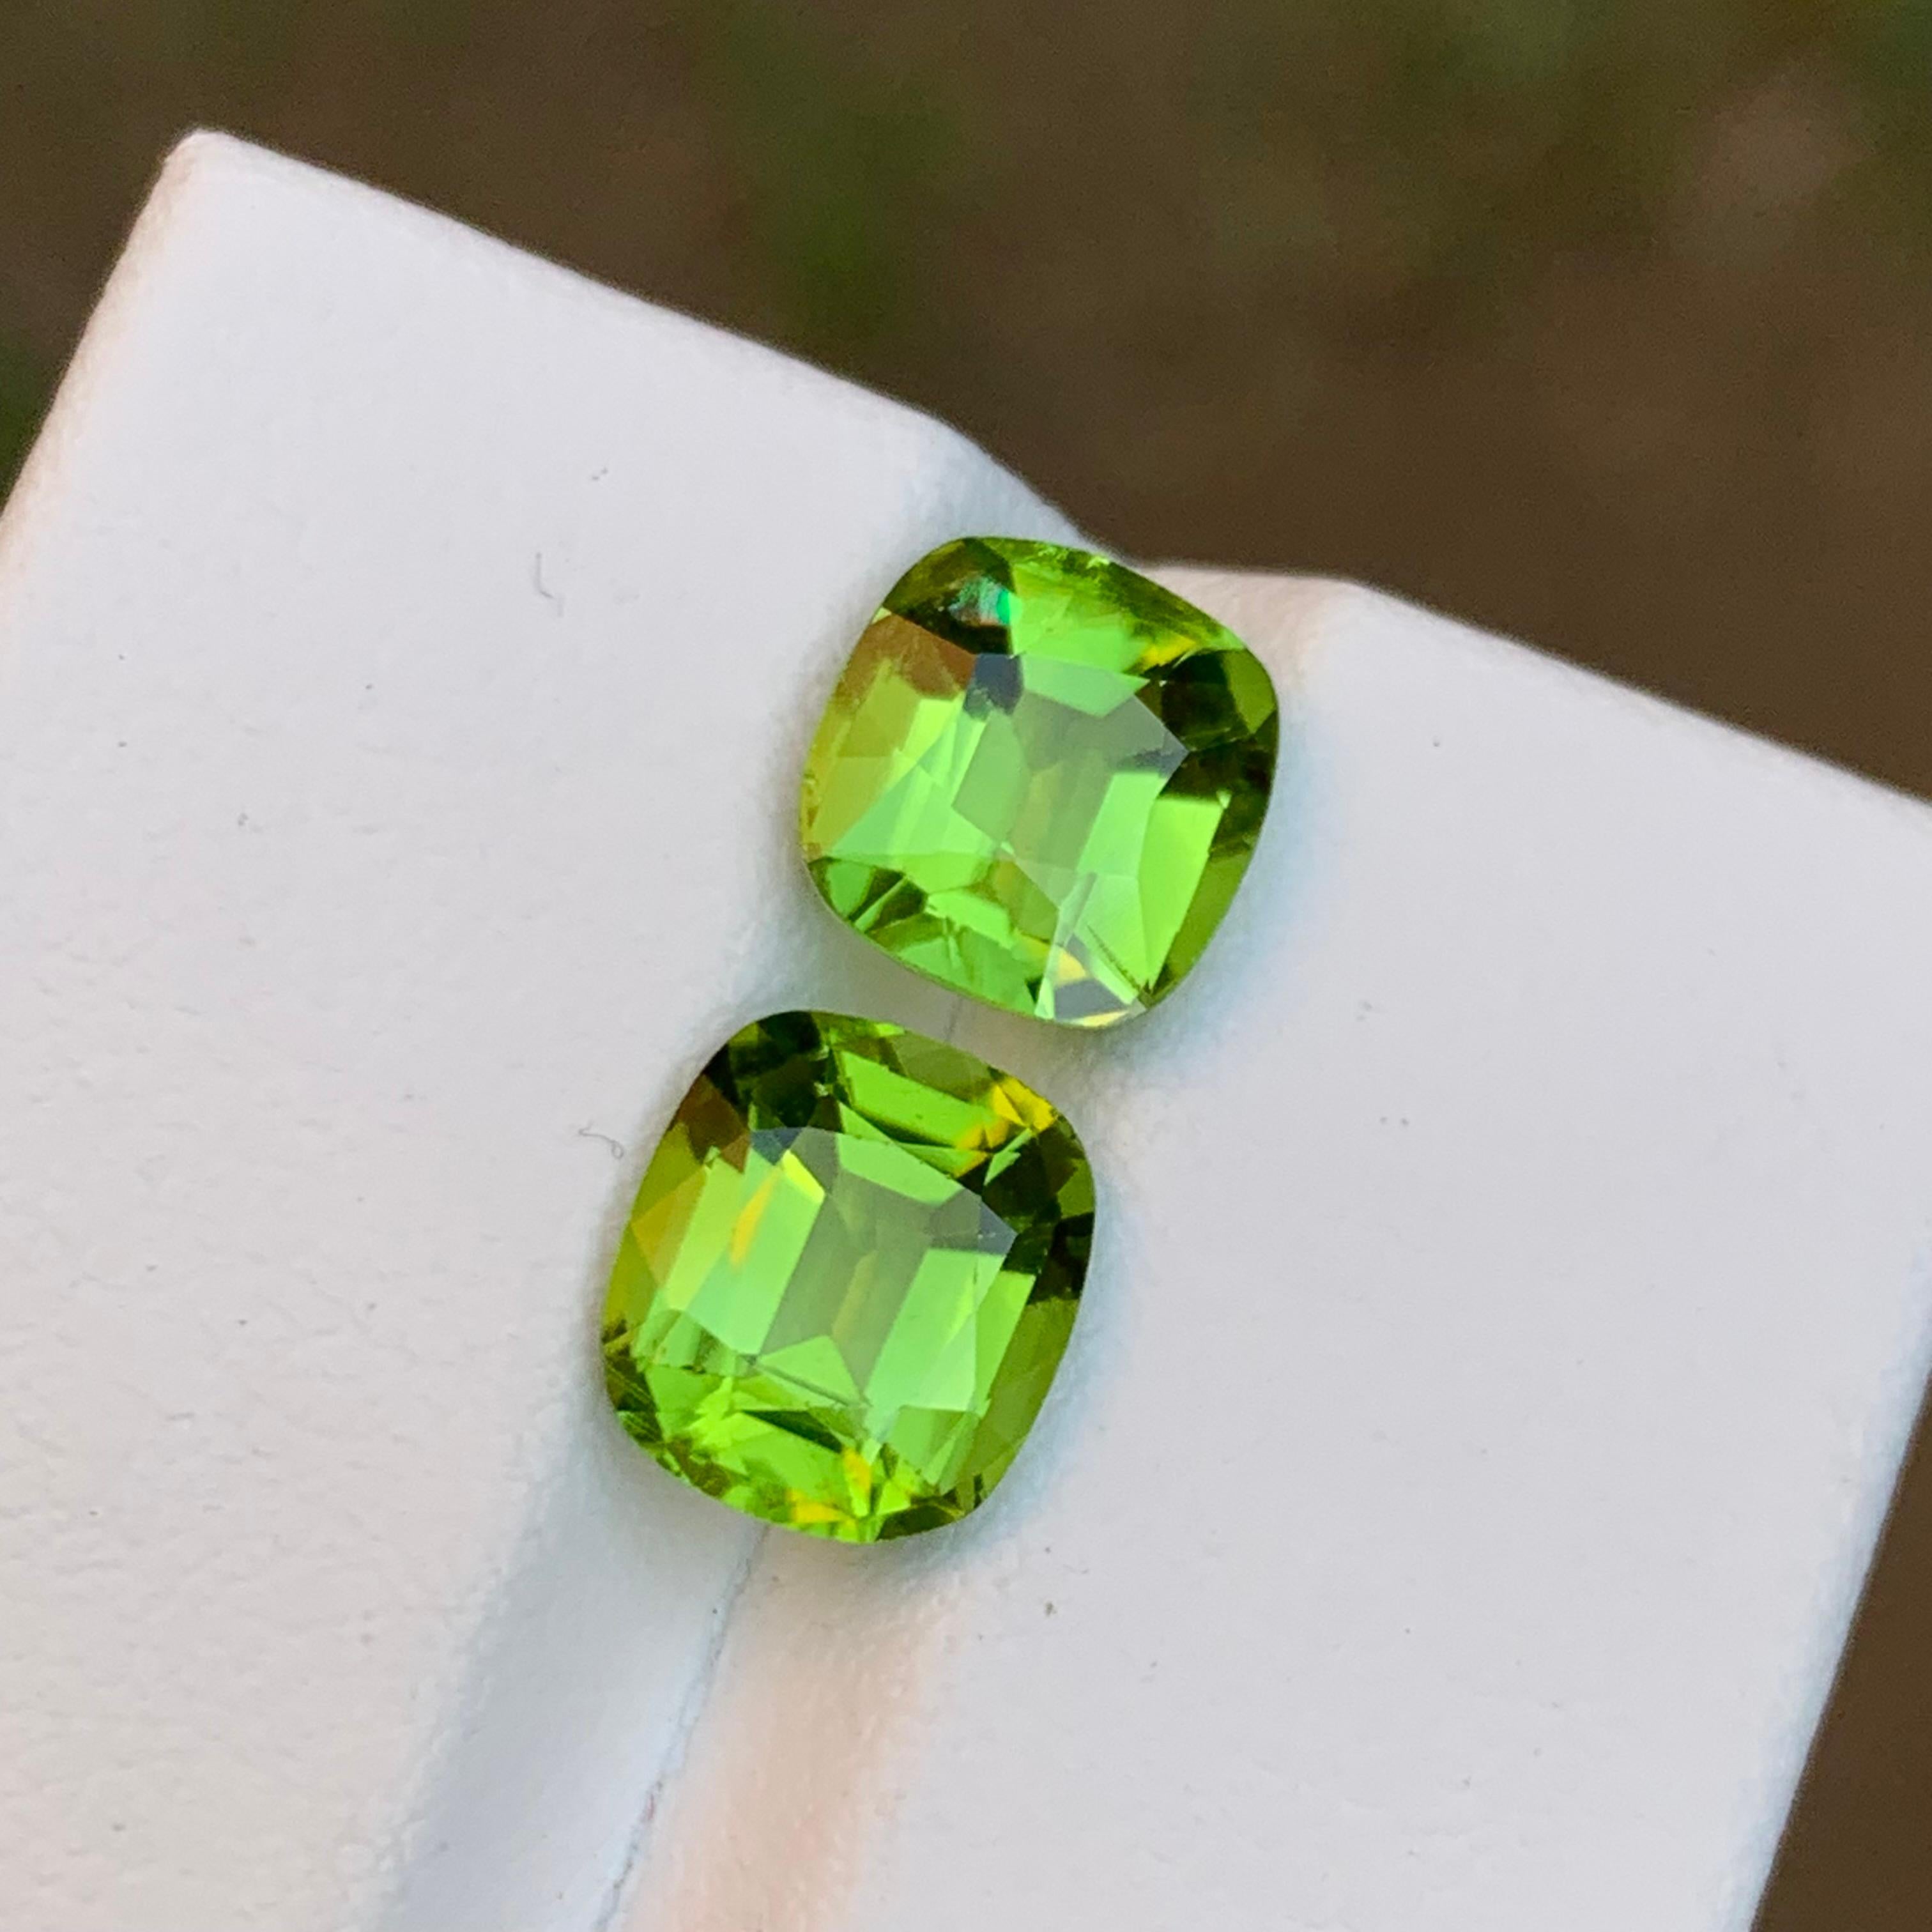 Introducing our exquisite Magnificent Green Peridot Gemstones sourced from the renowned Supat Mine in Pakistan, celebrated for yielding some of the world's finest peridots. The cushion cut showcases the vibrant green hue, complemented by brilliant